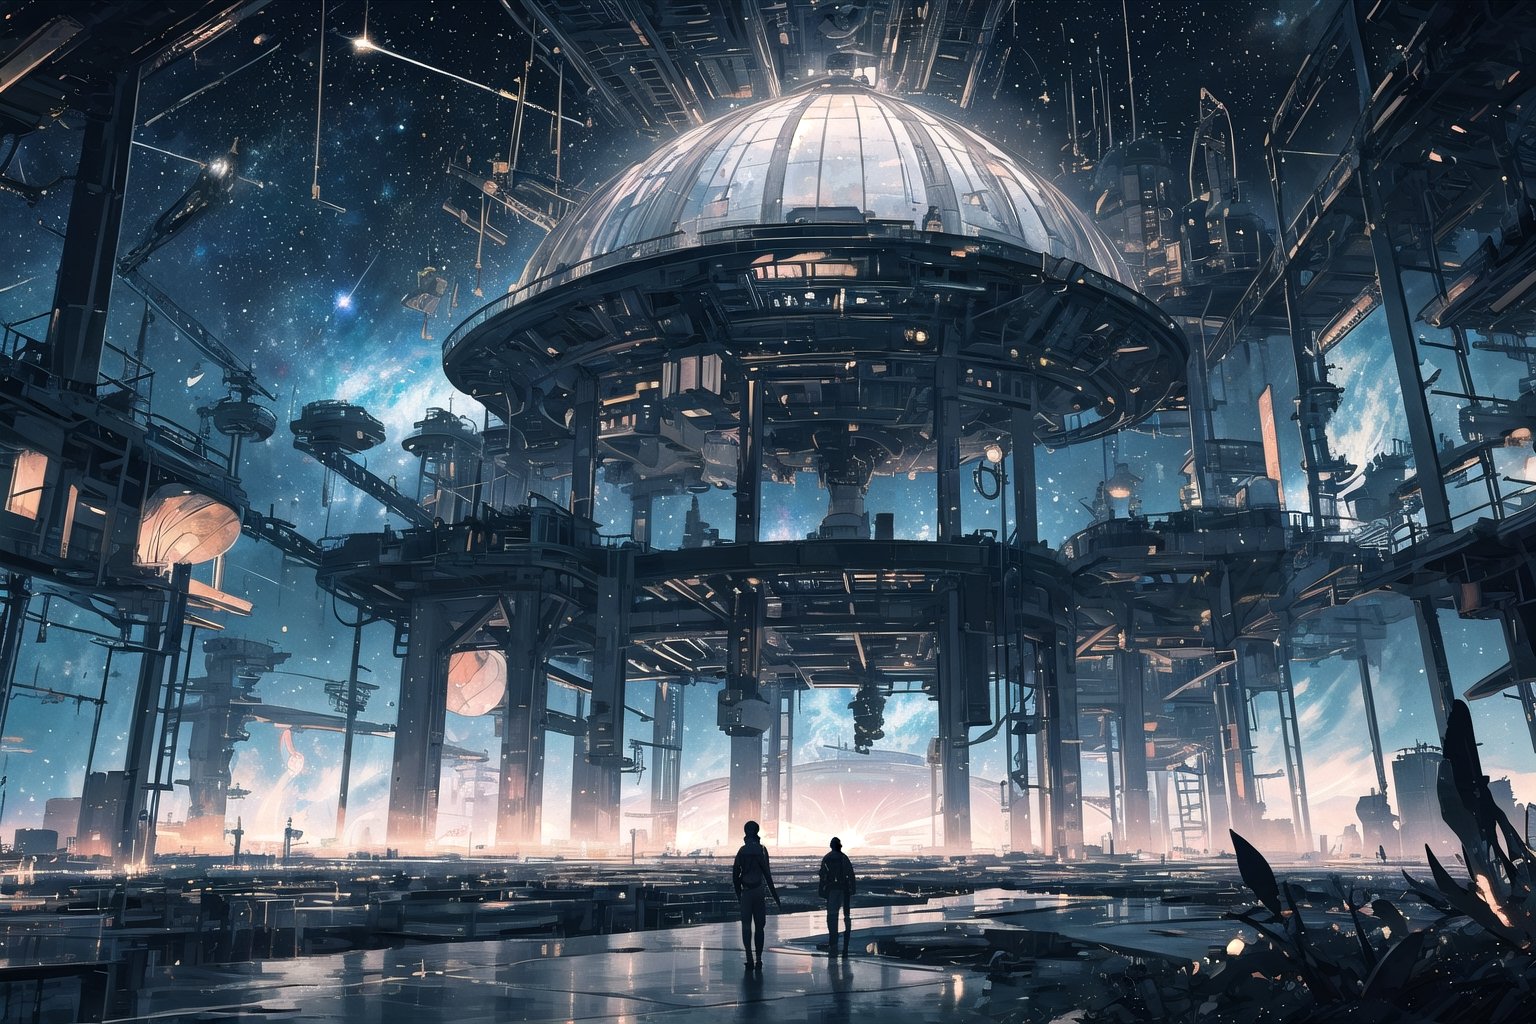 A space station made of silvery metal in universe with domes and reminescence of european architecture. This concept art is a 3d rendered illustration. The silvery colors of the space station contrast beautifully with the stark darkness of the cosmos, while the digital effects give a sense of movement and energy to the scene. The level of detail and realism in this image is truly mesmerizing, inviting viewers to get lost in the futuristic world of satellite ,masterpiece,DonMM4ch1n3W0rld ,midjourney